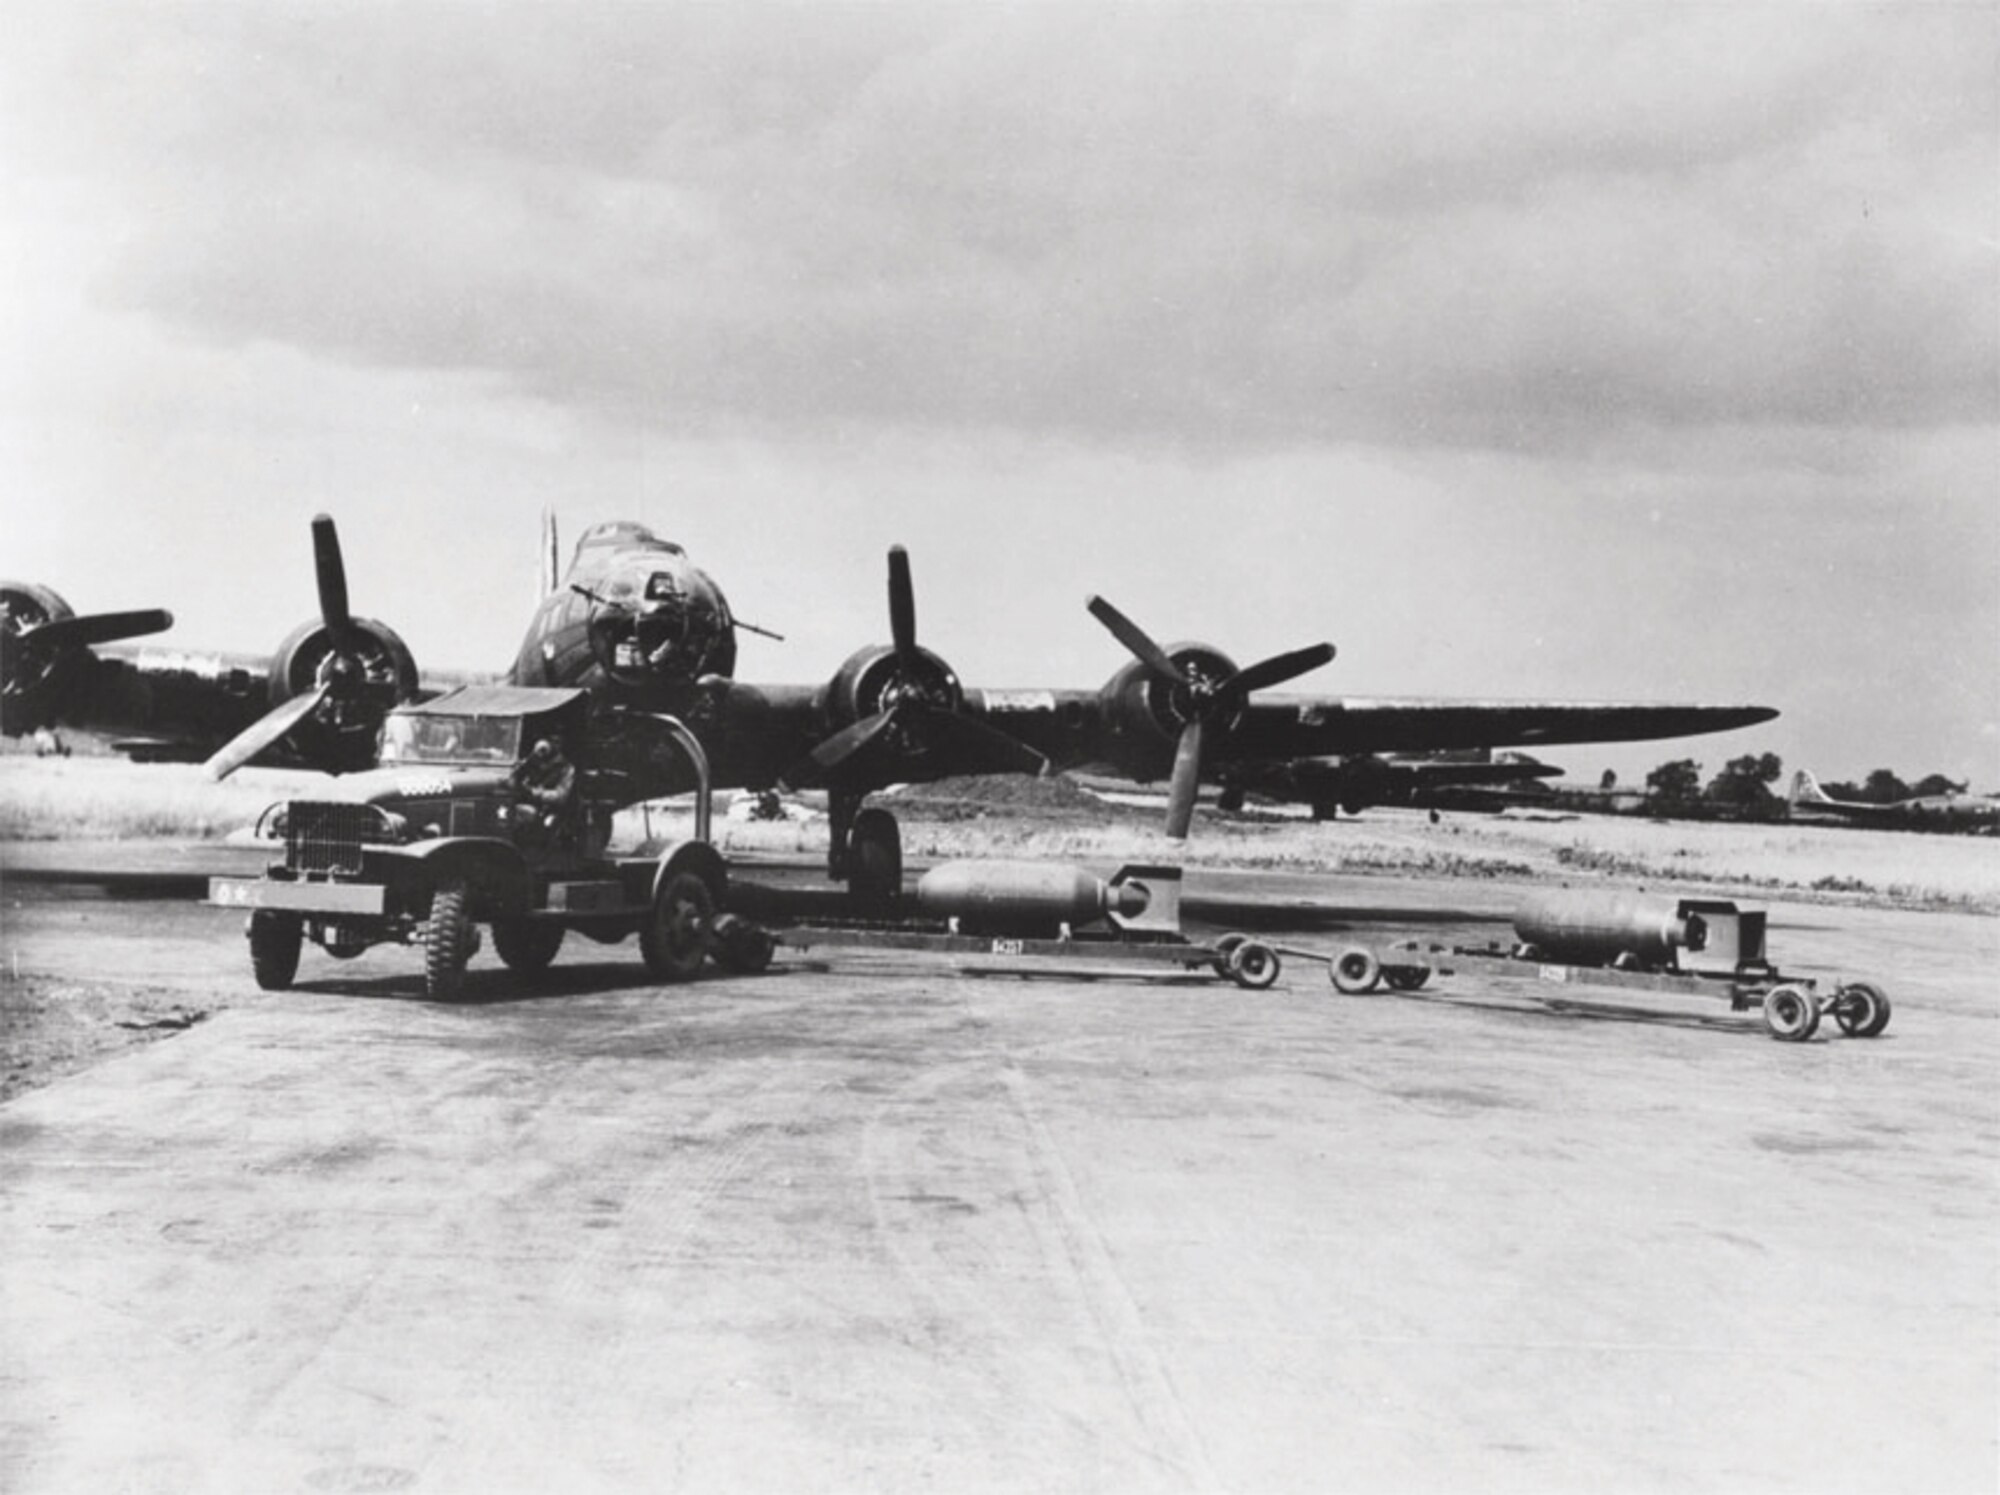 An ordnance crew loads bombs on an England-based B-17 Flying Fortress before it takes off on a mission over enemy territory.  (U.S. Air Force photo)